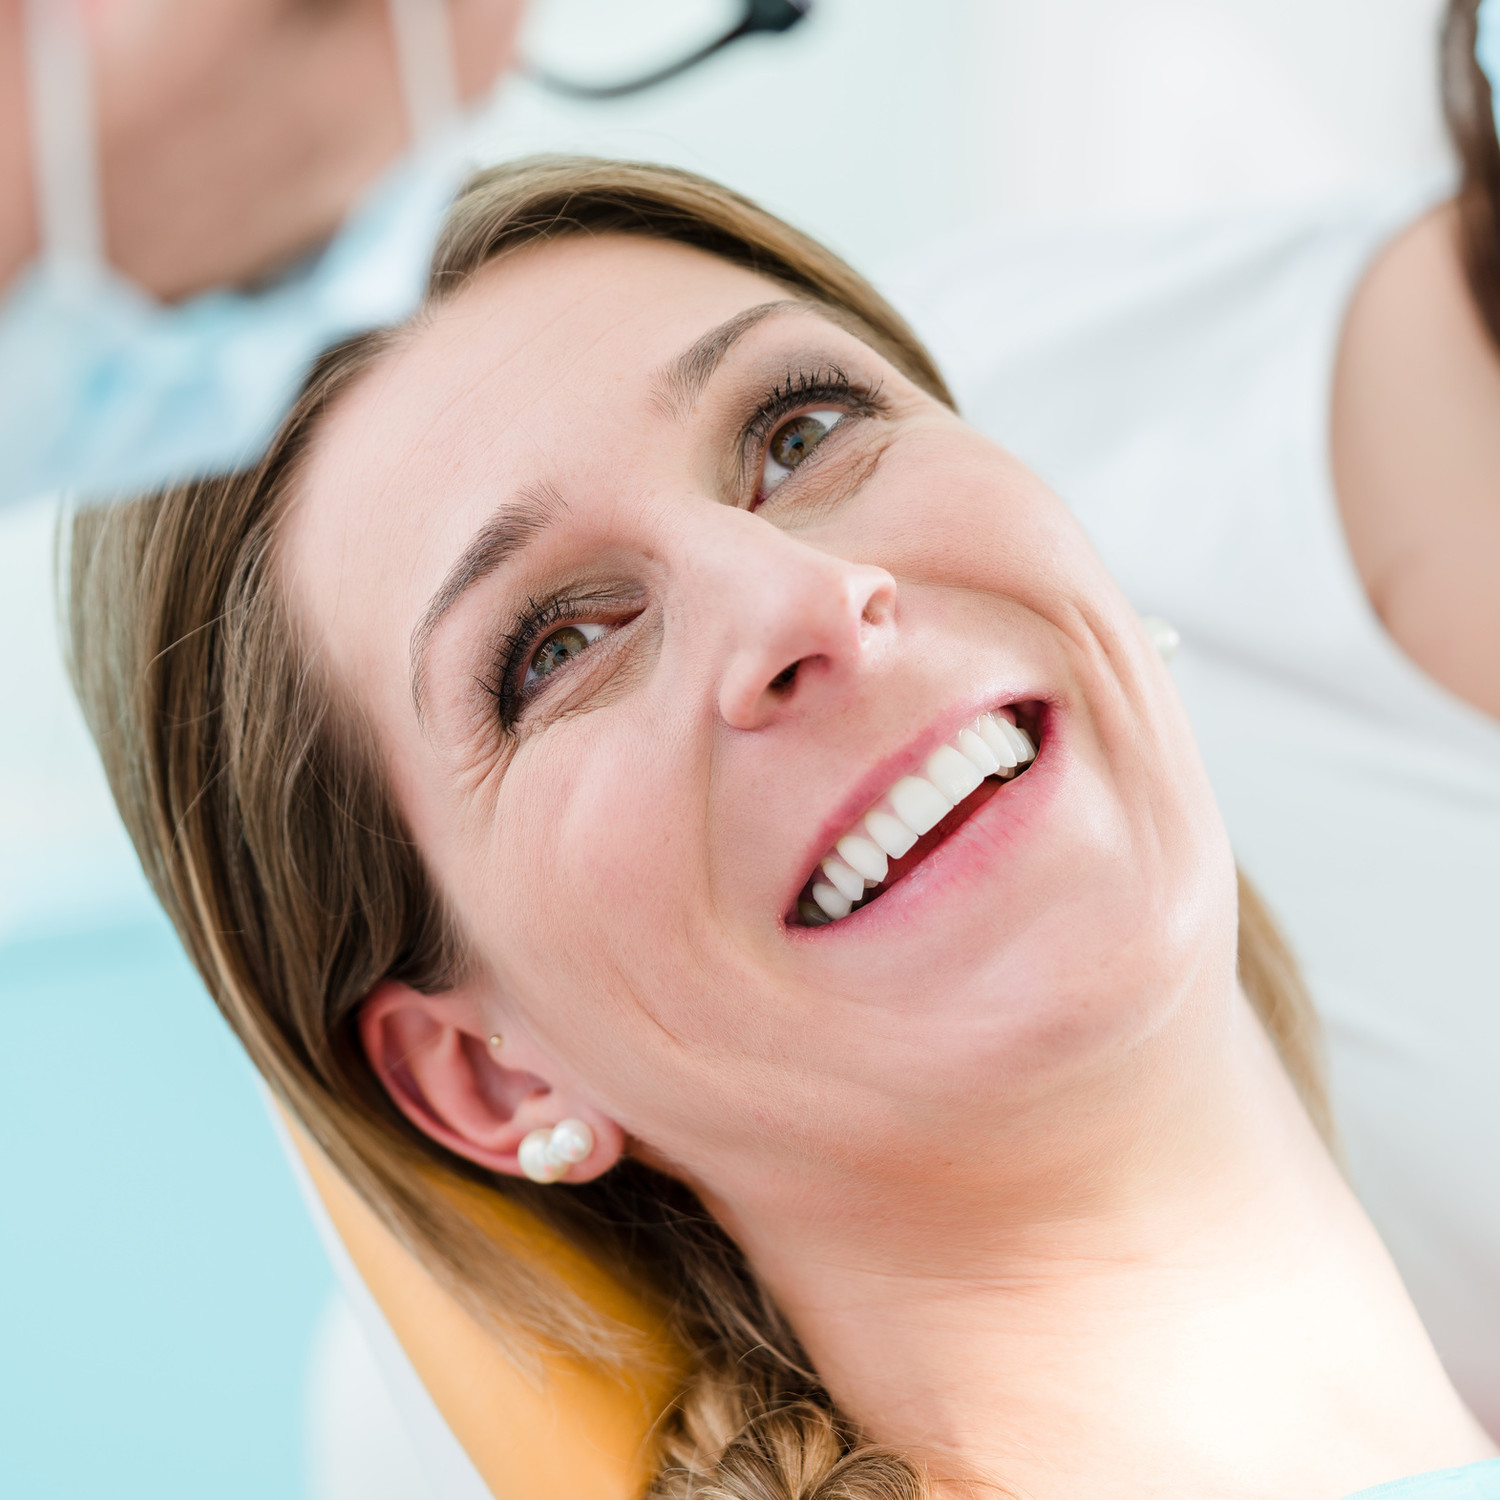 Dentist, Woman, tooth, teeth, smiling, clean, toothy, man, Dentistry, office, surgery, clinic, dentists office, dental, patient, treatment, doctor, seeing, Profession, occupation, working, people, person, room, Caucasian, white, stomatology